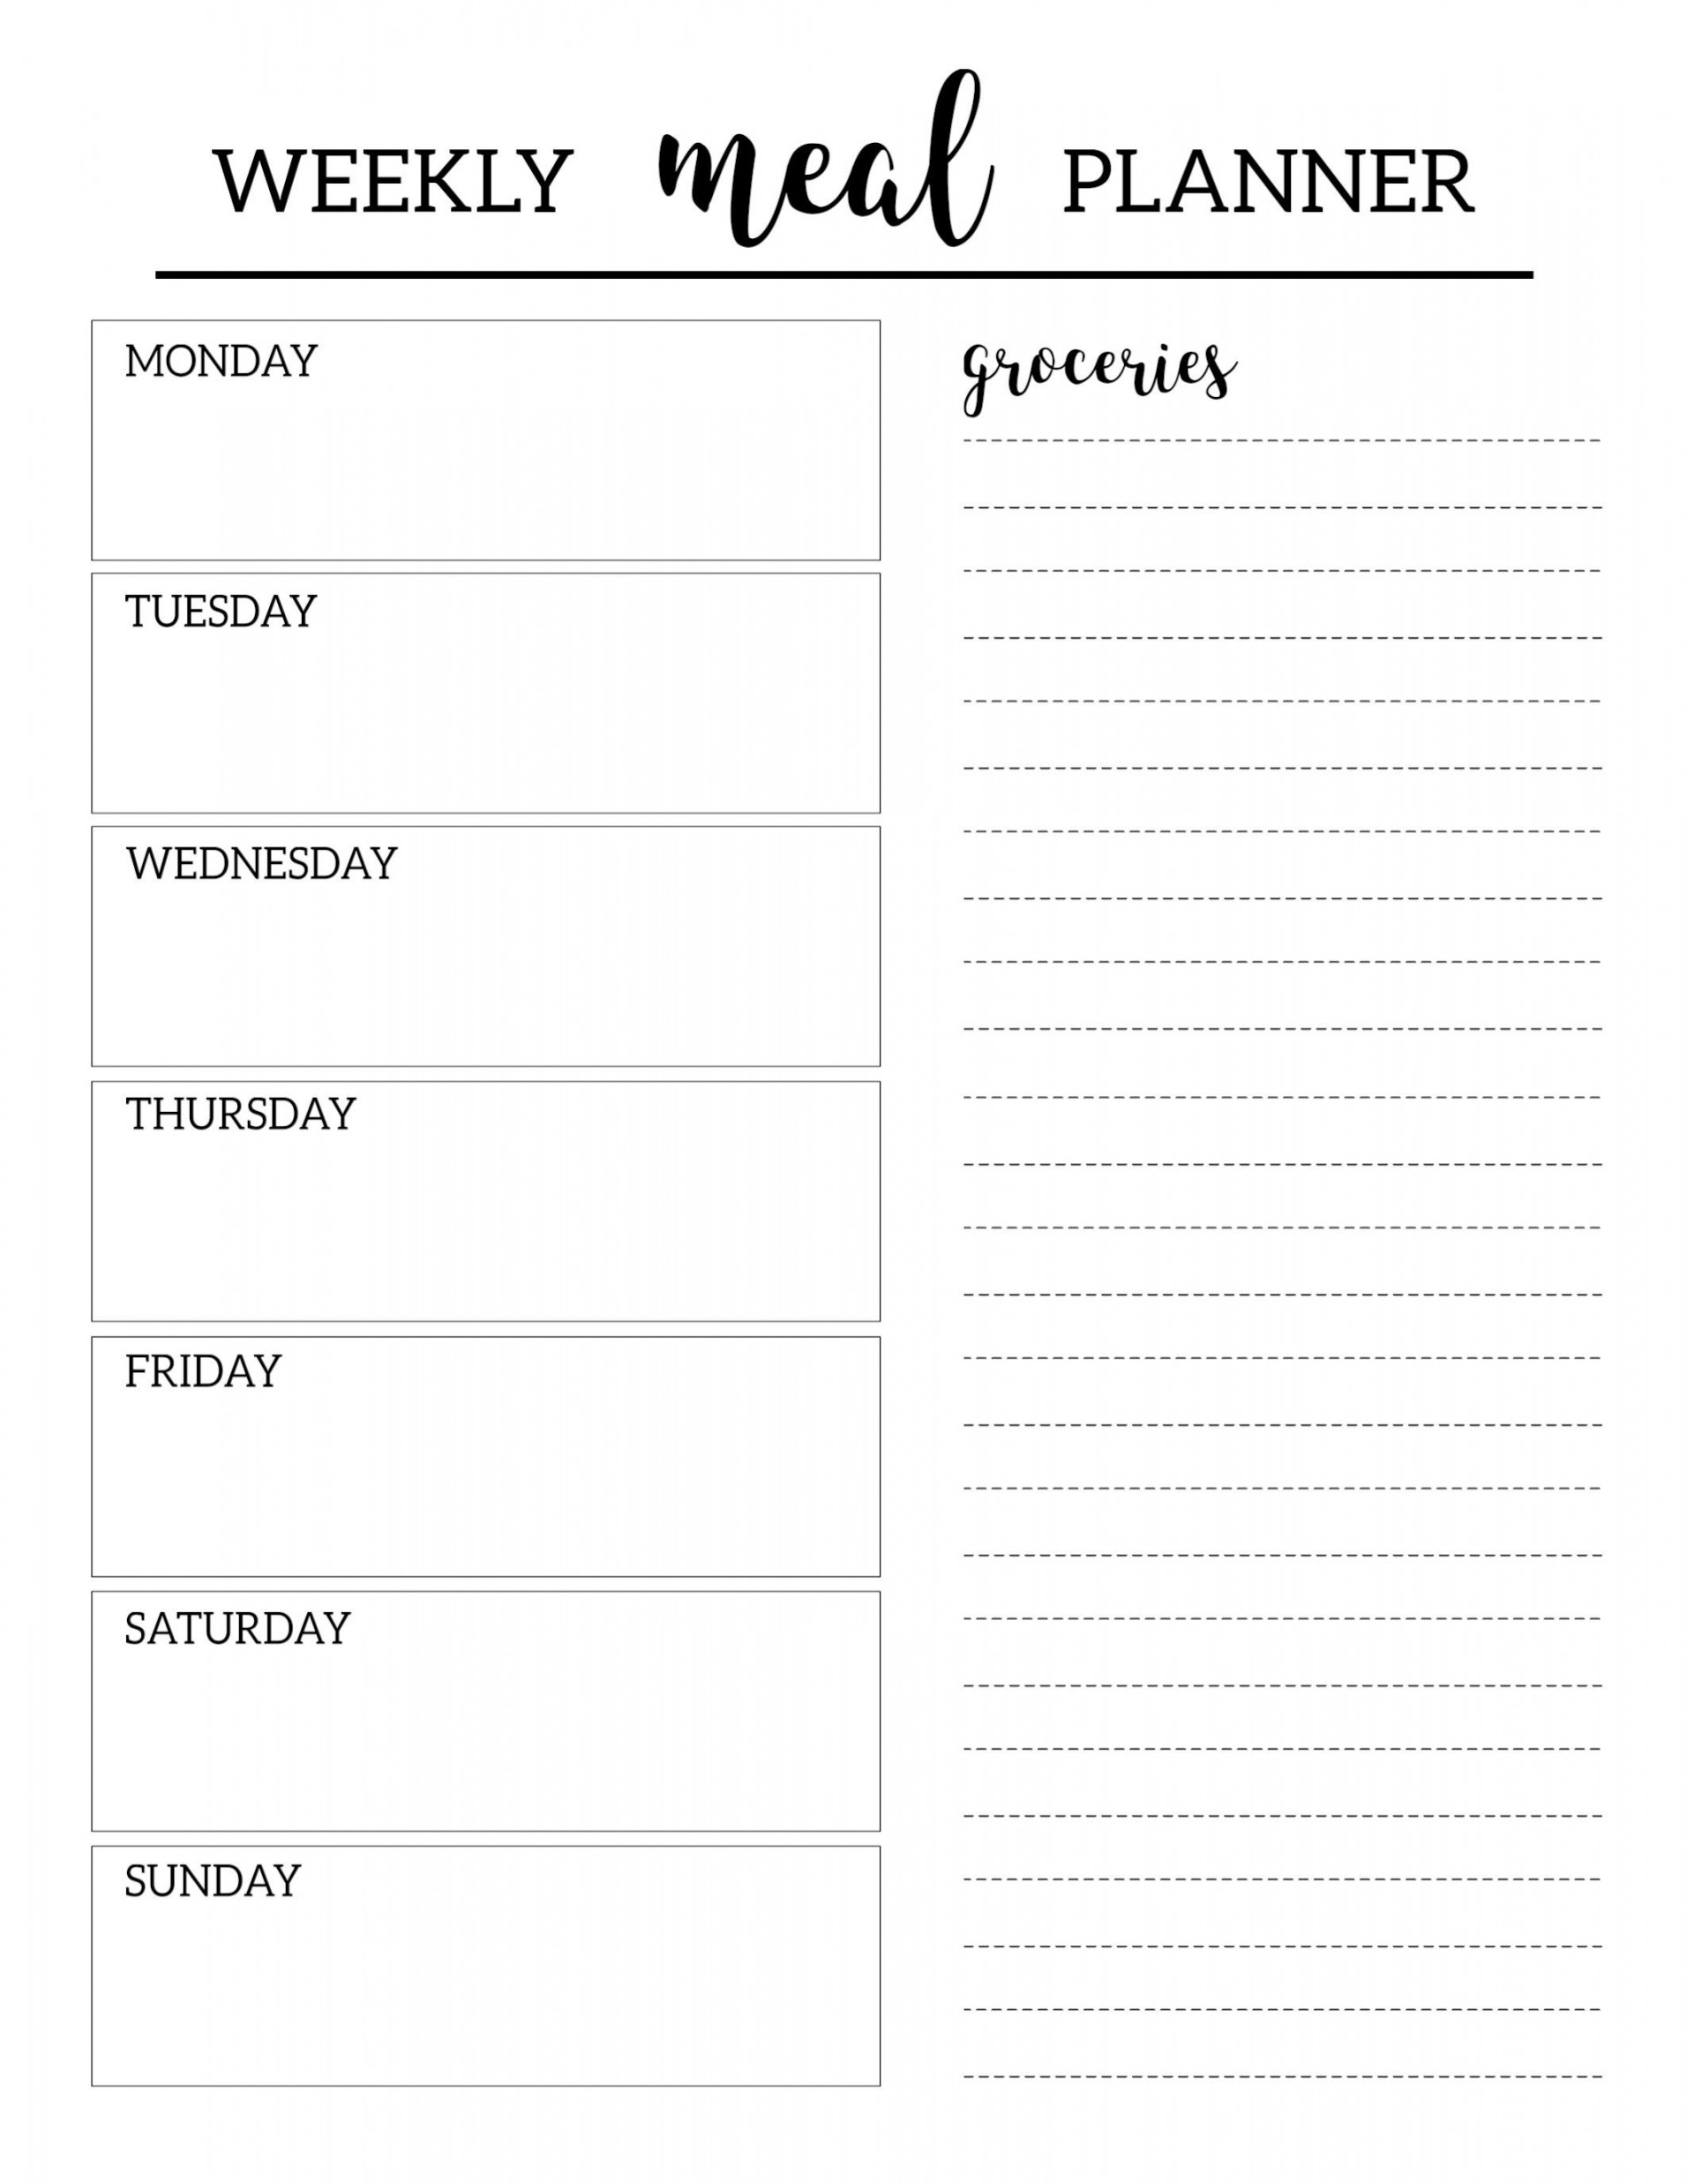 Free Printable Meal Planner Template - Paper Trail Design  Weekly